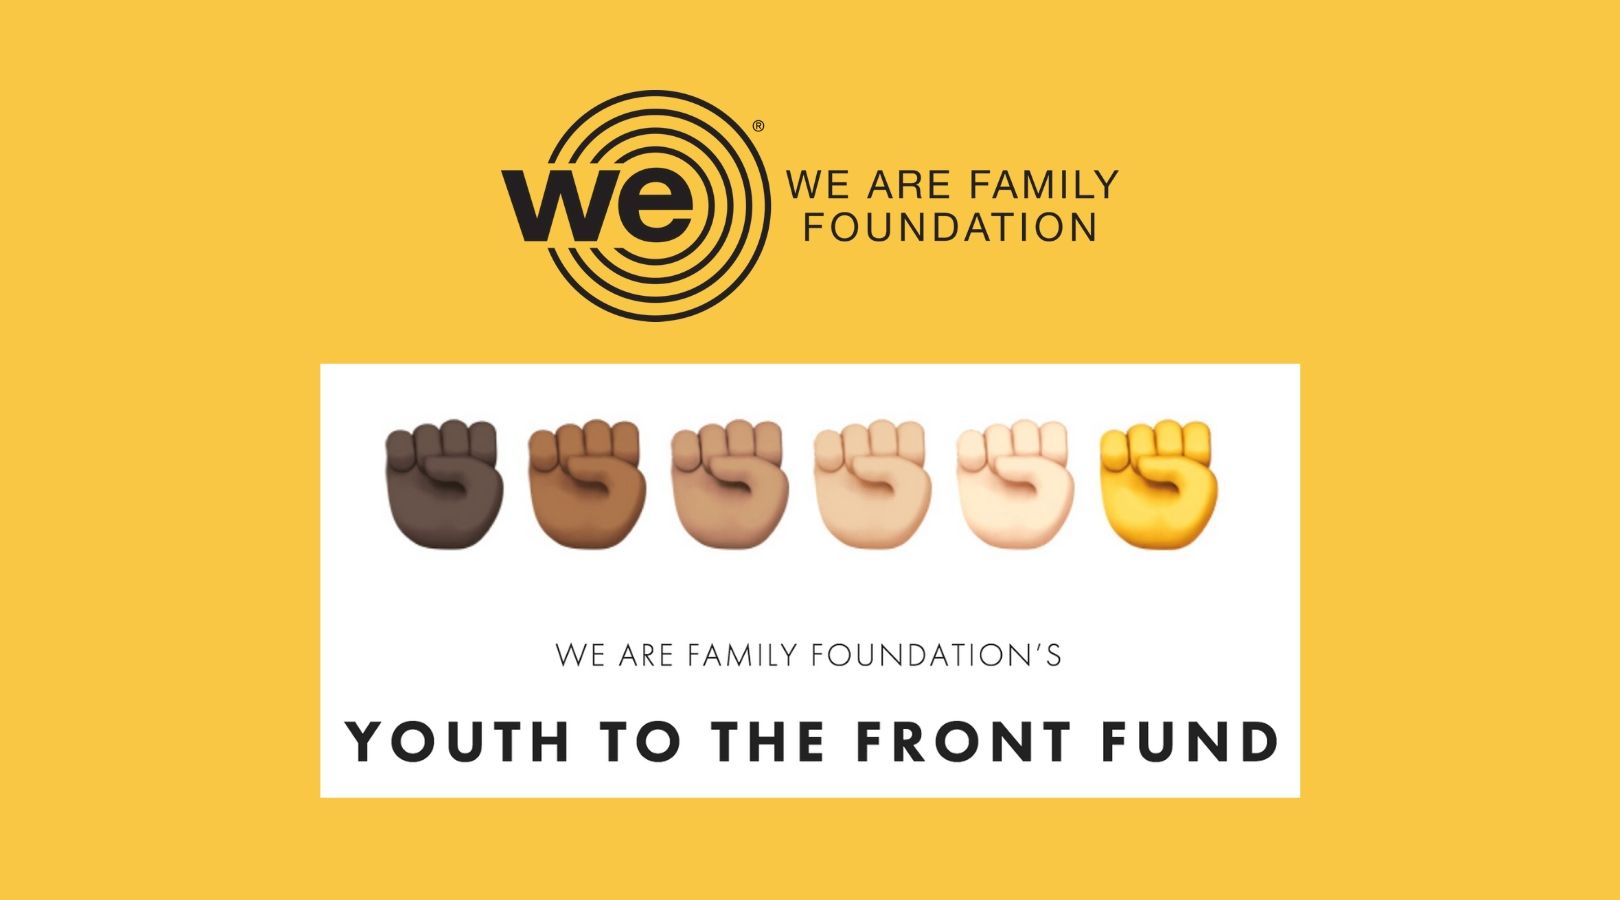 We Are Family Foundation (WAFF) Youth to the Front Fund 2020 – Global Funding Opportunity